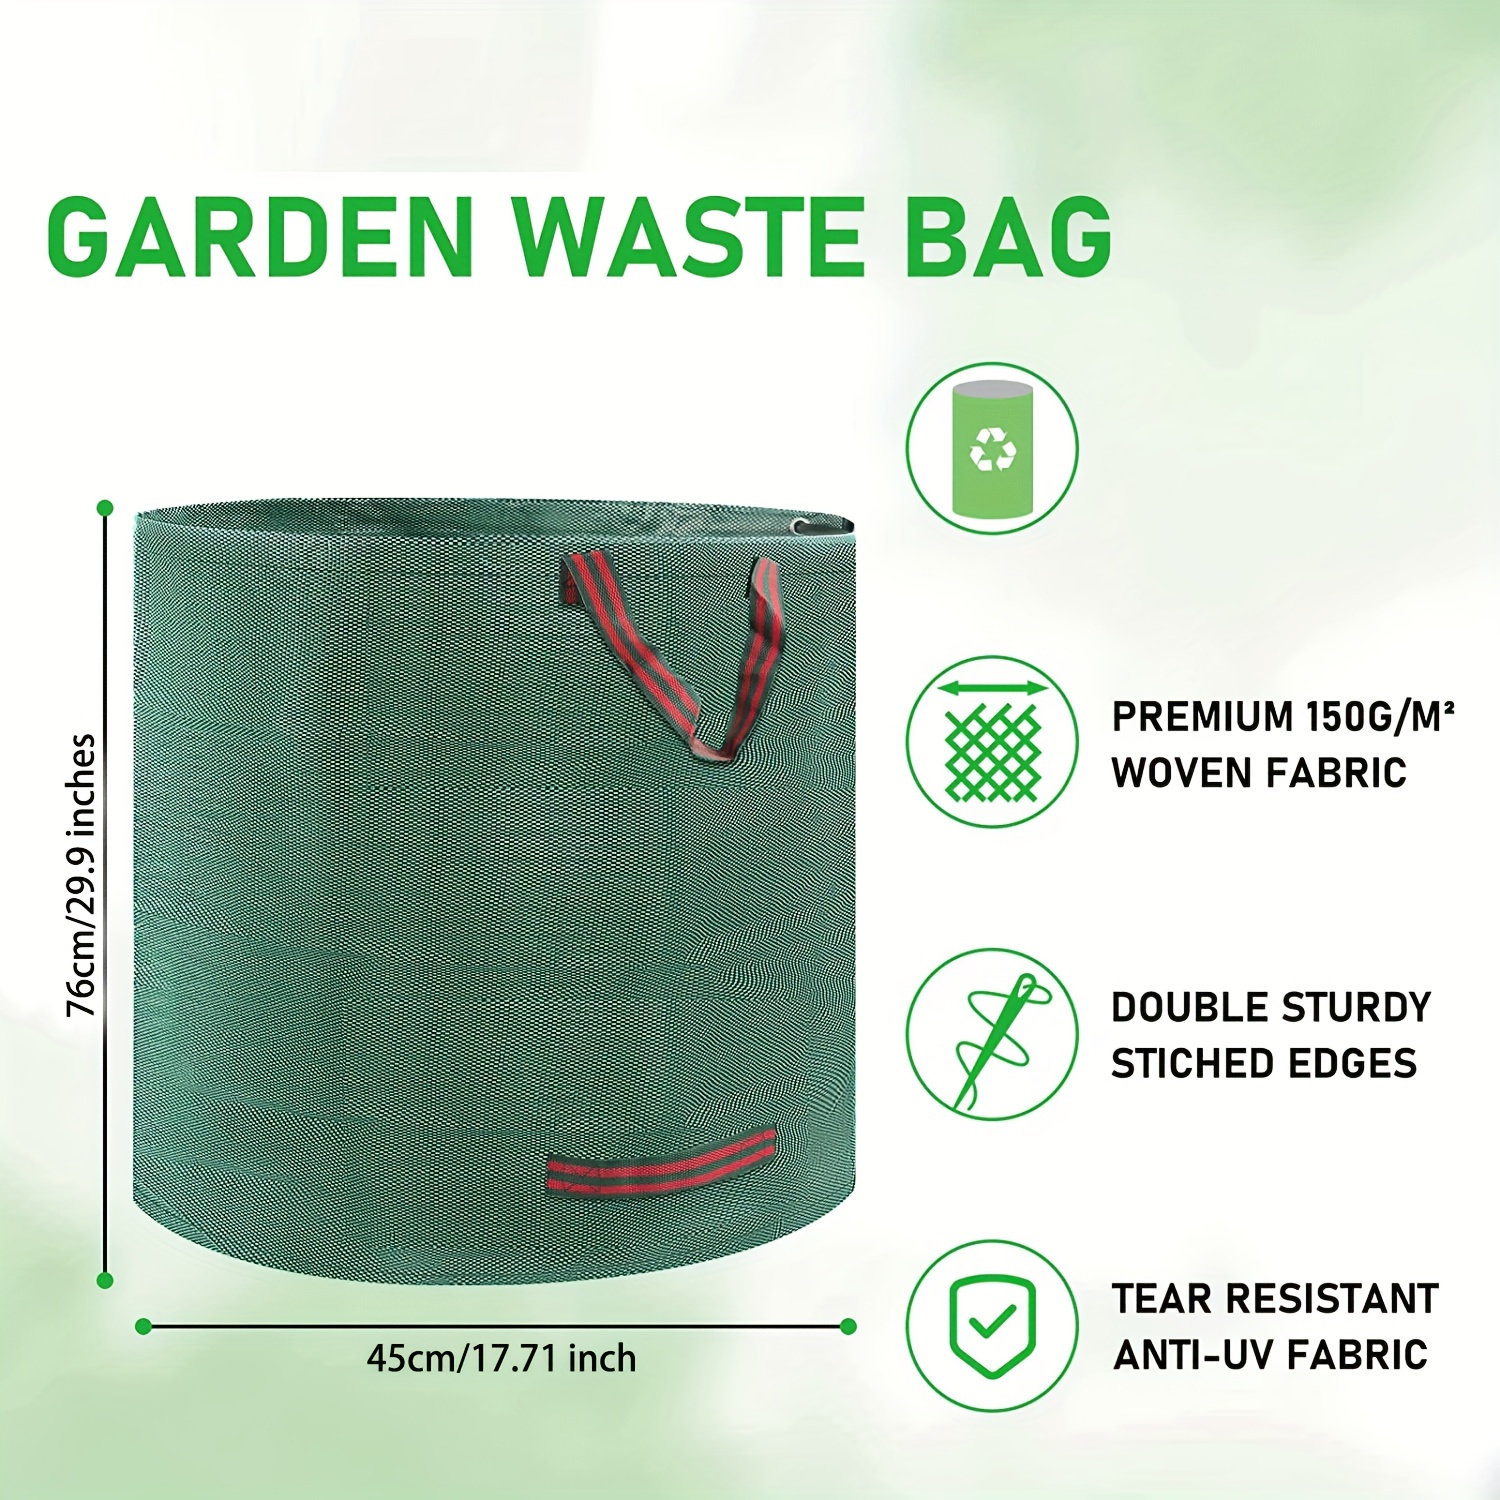 Garnen [2 Pack] 72 Gallon Garden Waste Bags, Heavy Duty Reusable / Collapsible Leaf Bags with 4 Reinforced Handles for Lawn Yard Pool Plant Trash